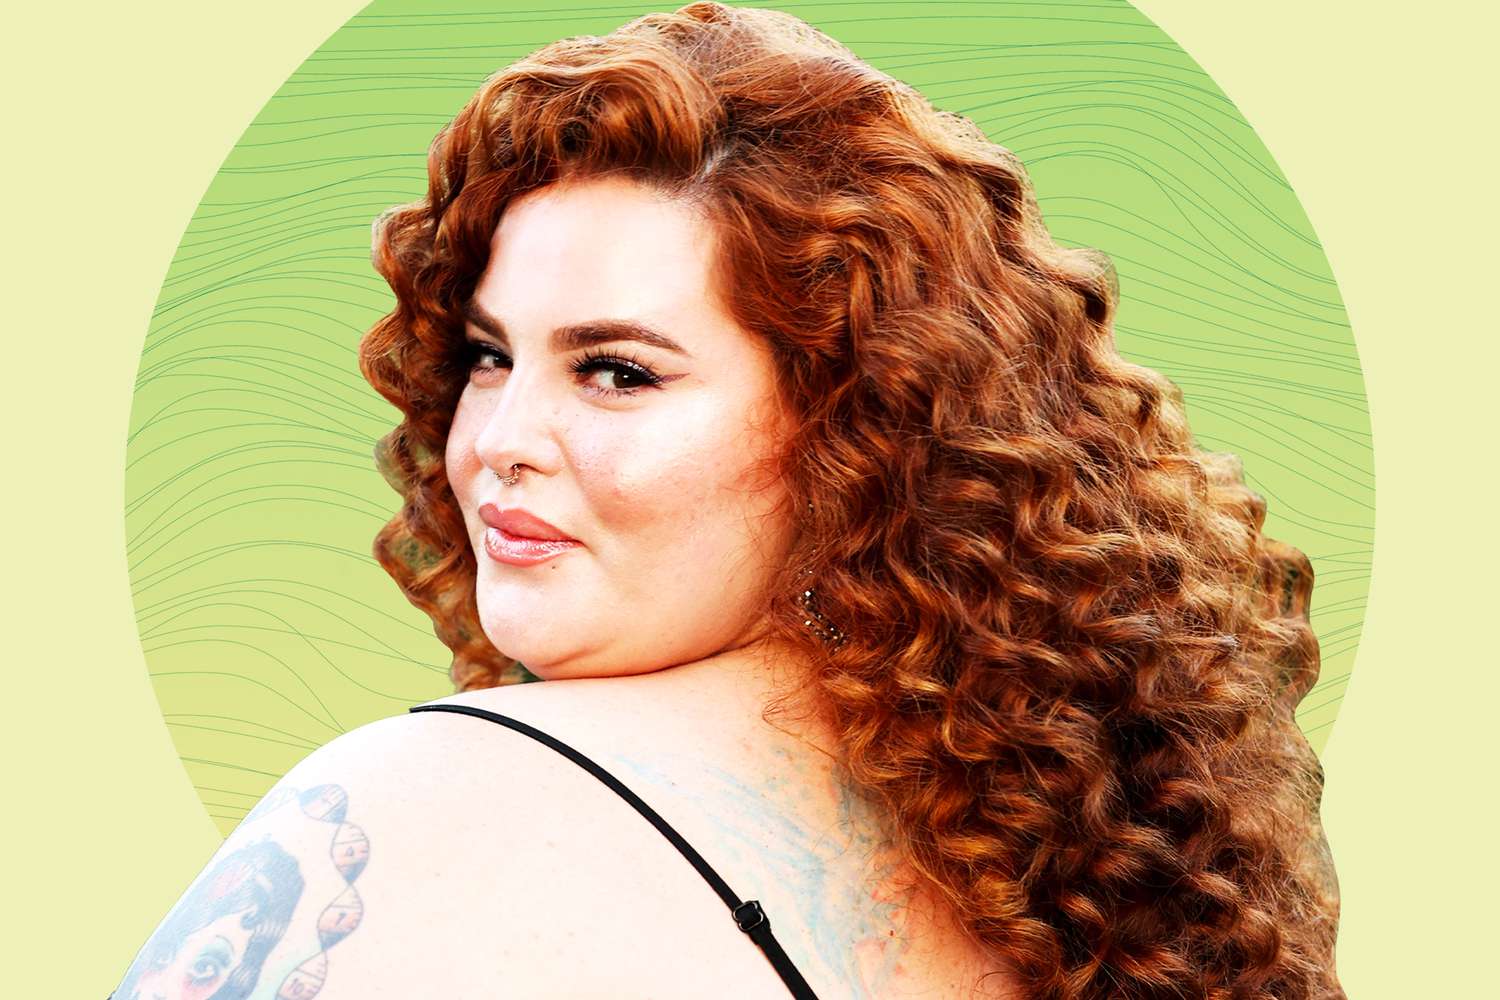 Tess Holliday on a designed background